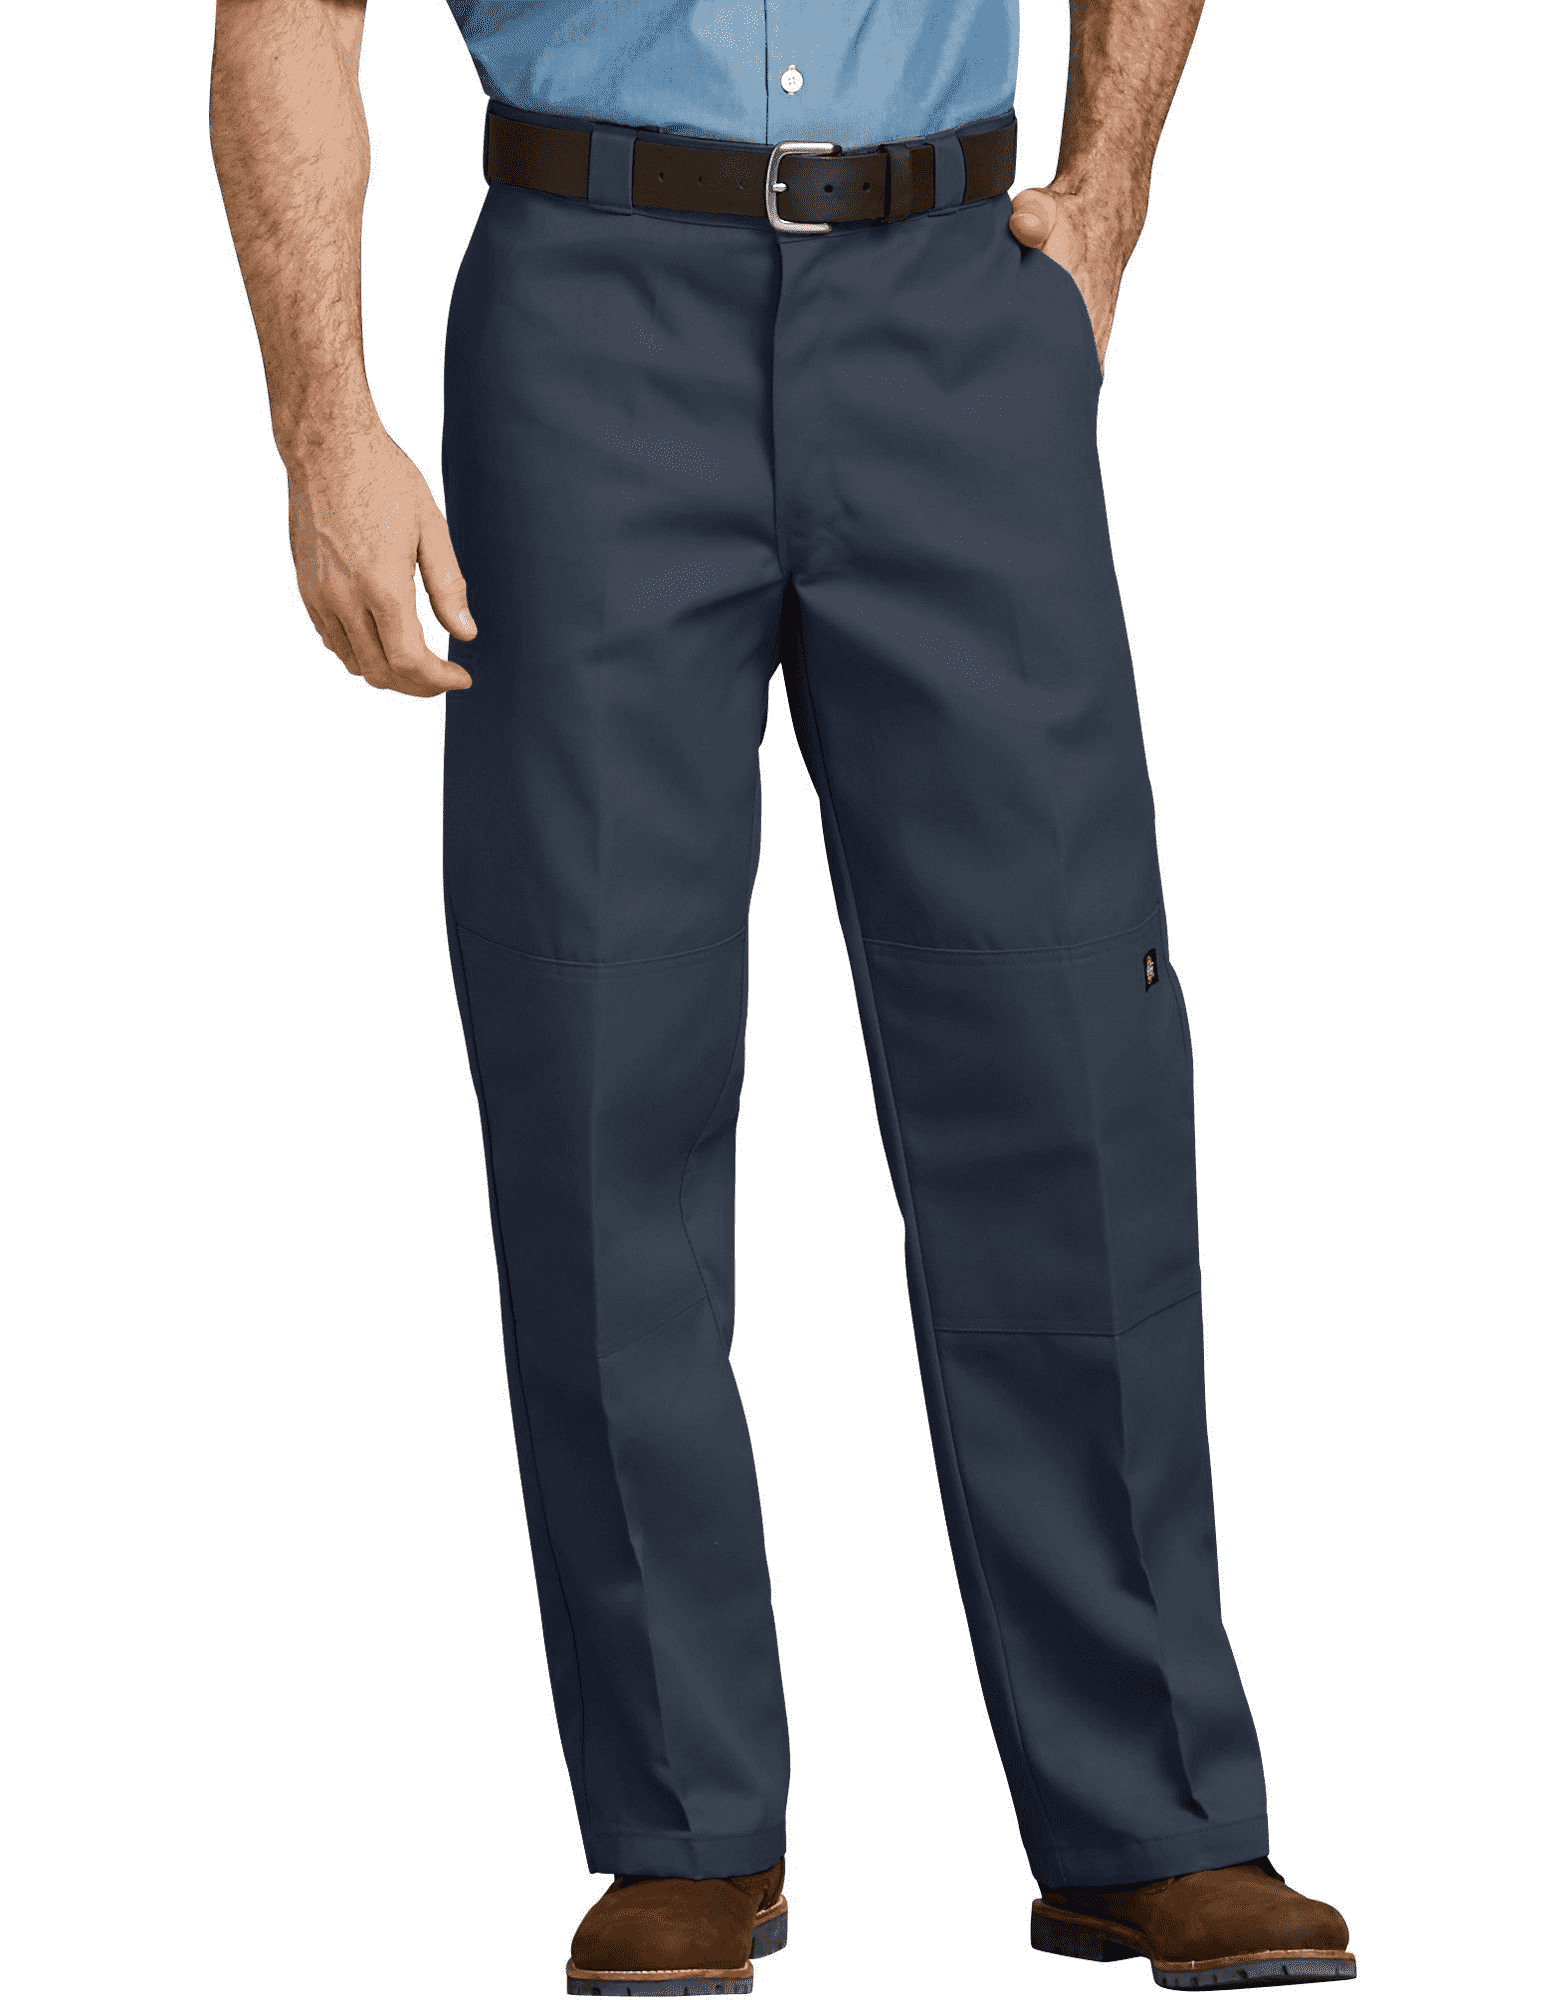 Loose Fit Double Knee Work Pant (Dark Navy)(Dk Navy) - Purpose-Built / Home of the Trades